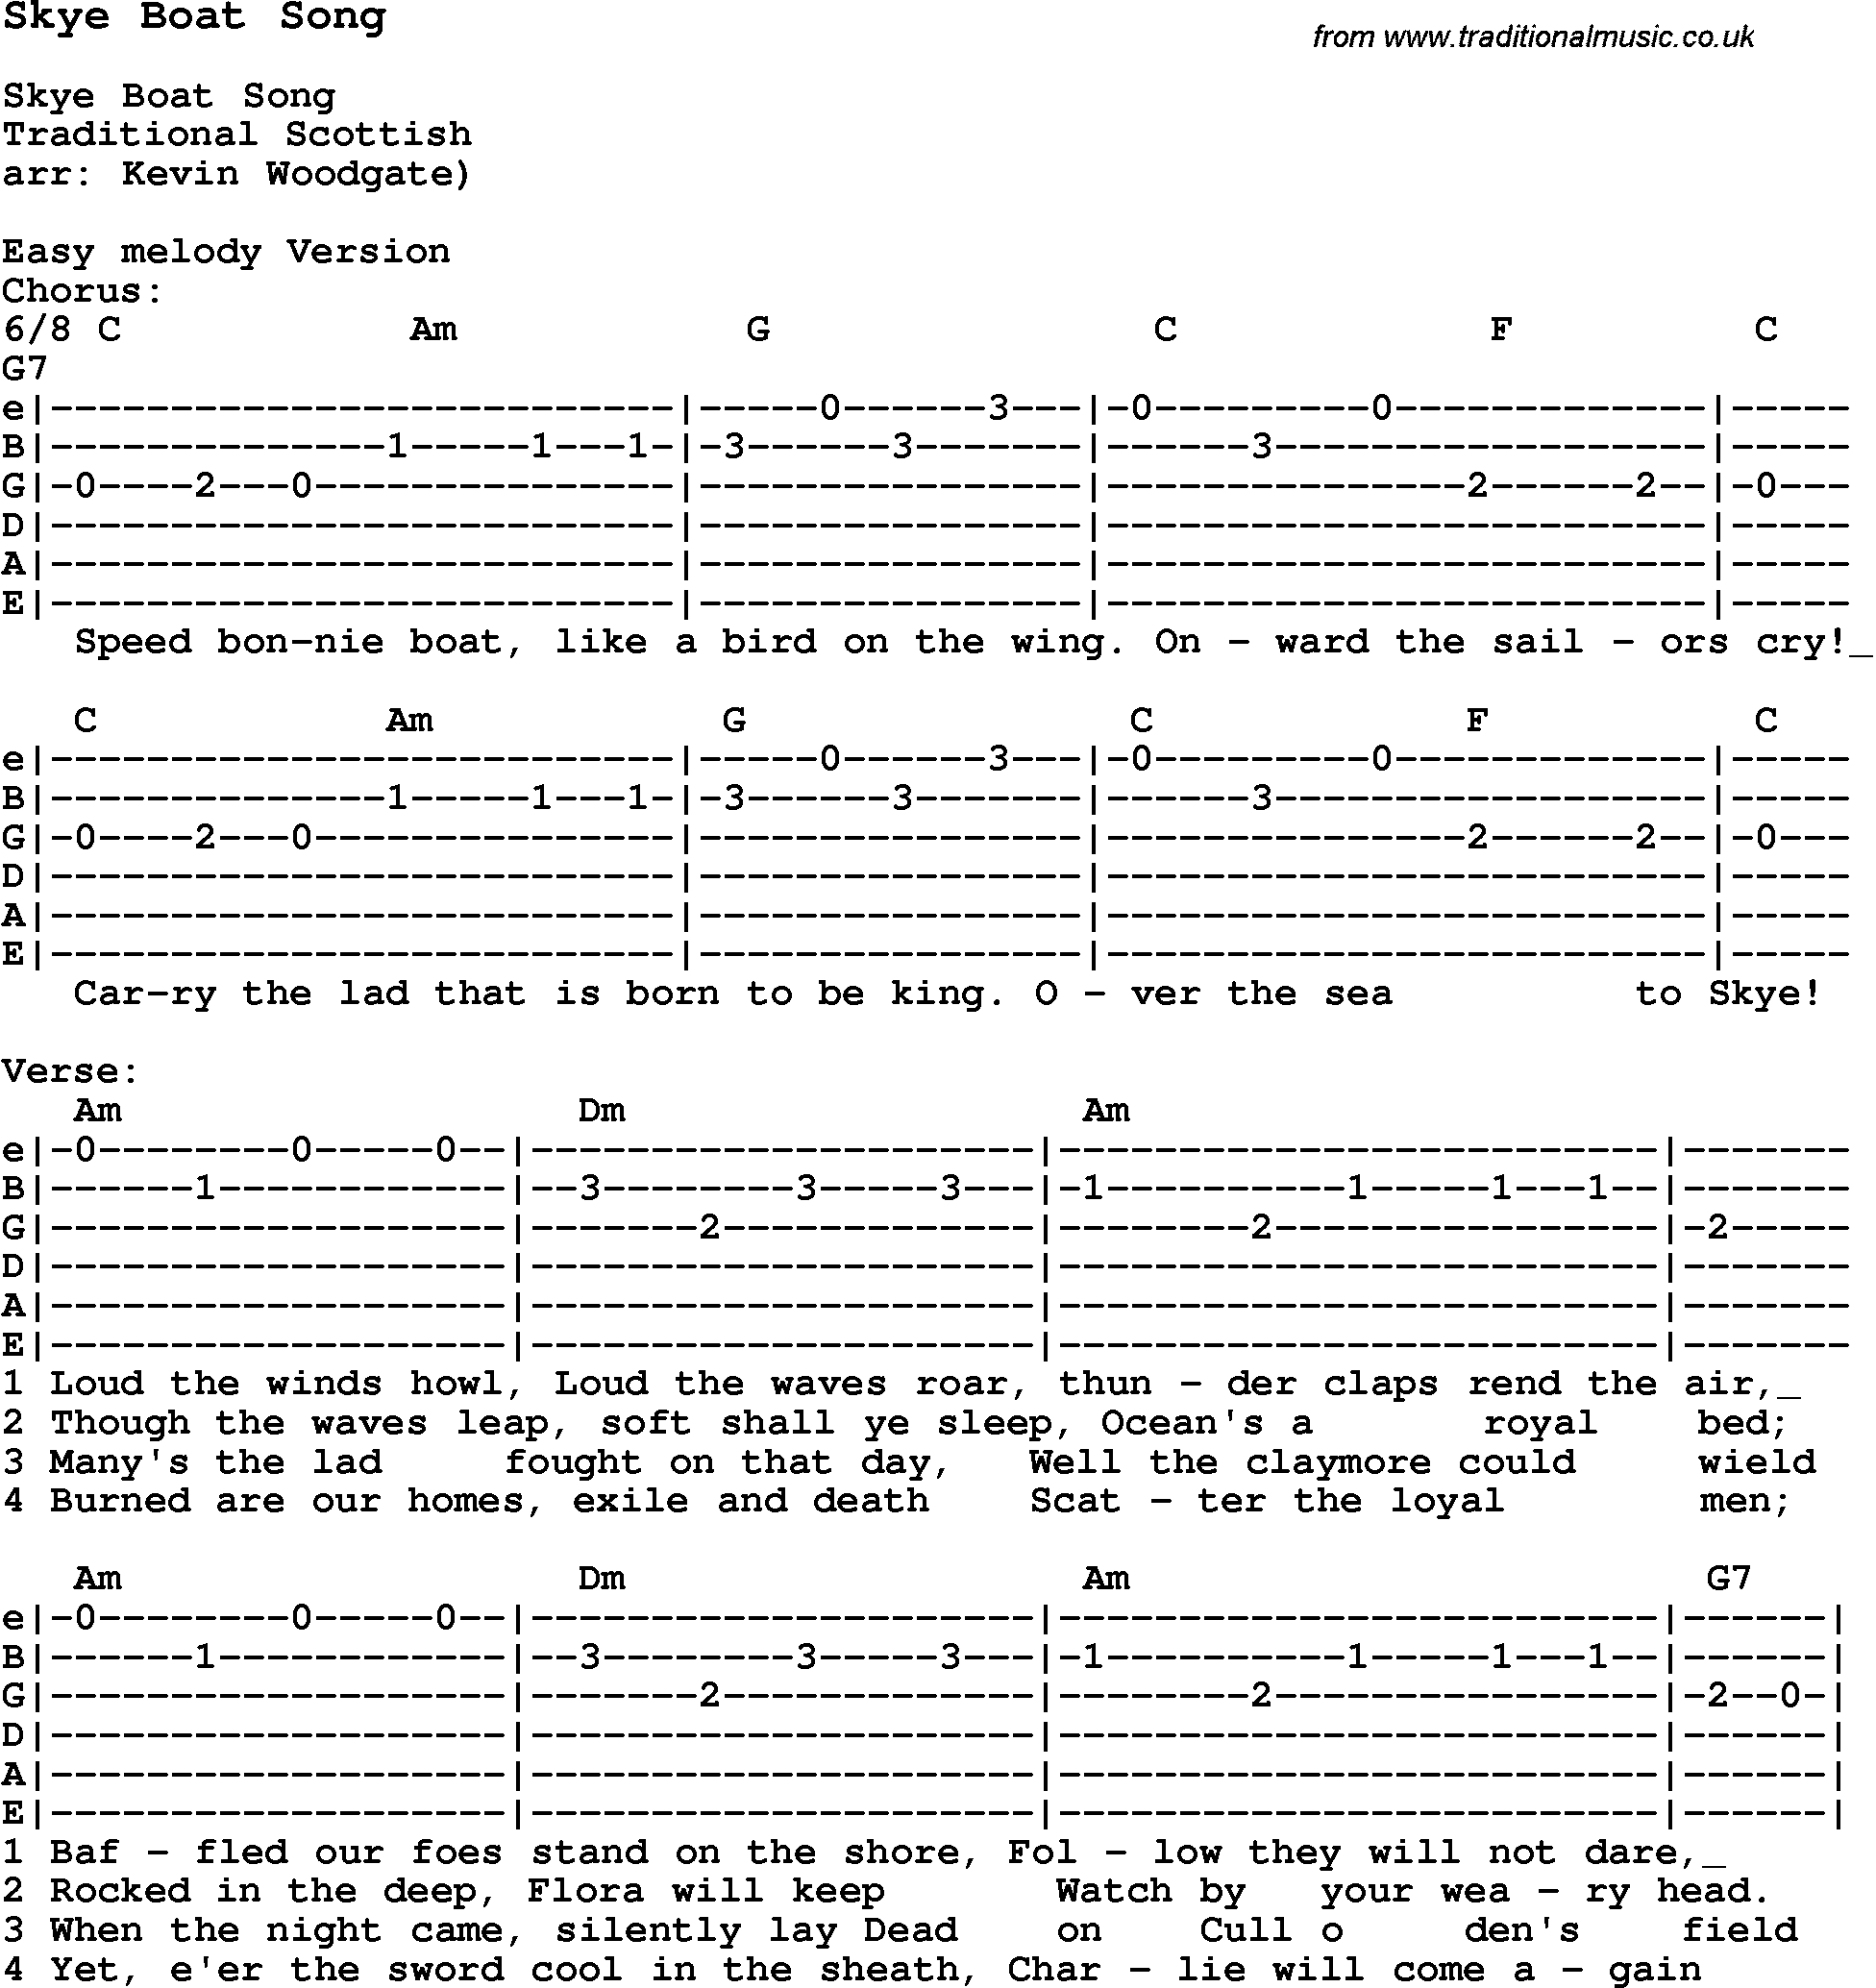 Traditional Song Skye Boat Song with Chords, Tabs and Lyrics